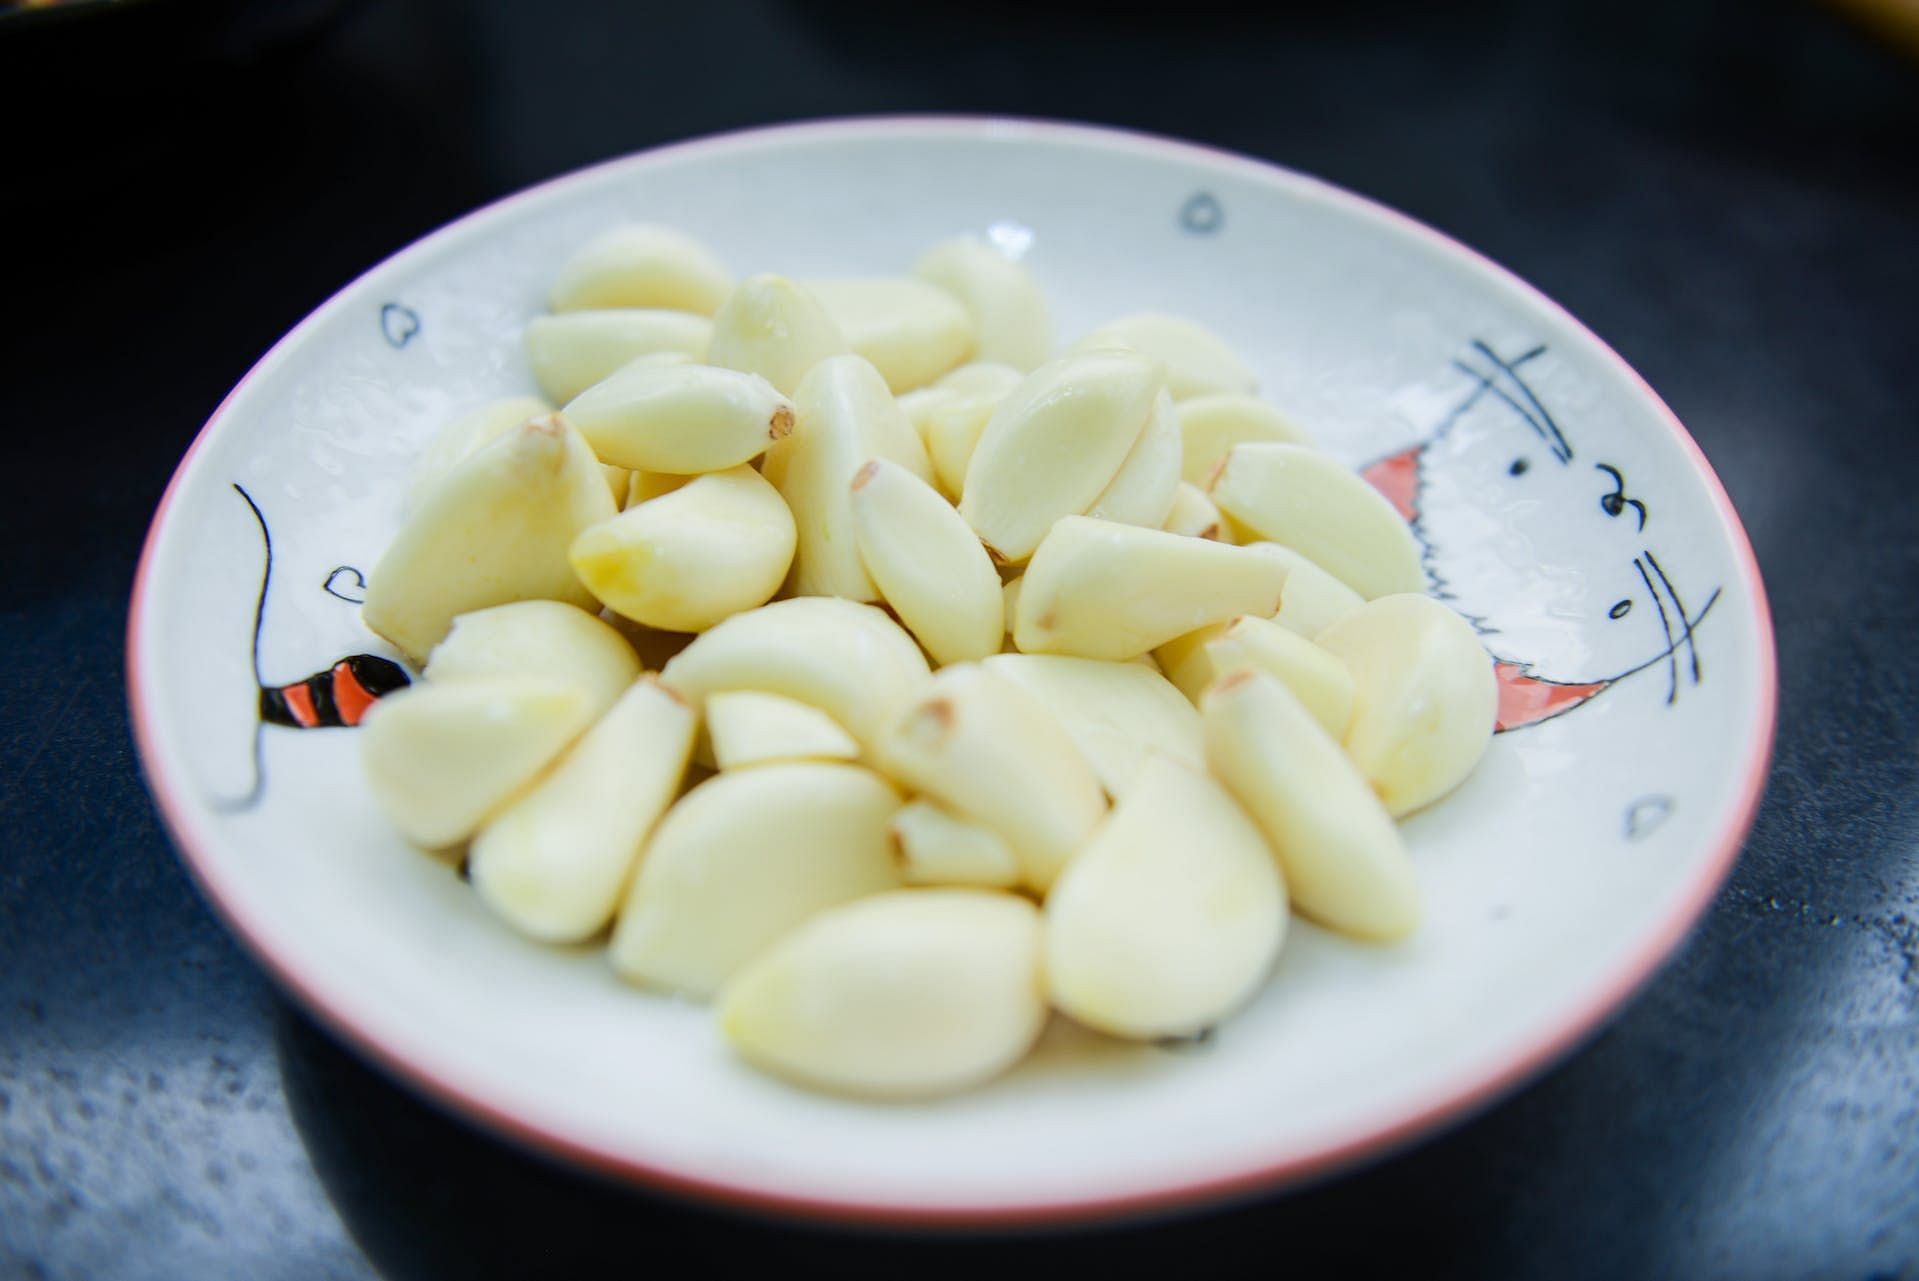 Consuming garlic is one of the best home remedies for laryngitis. (Image via Pexels/Cats Coming)